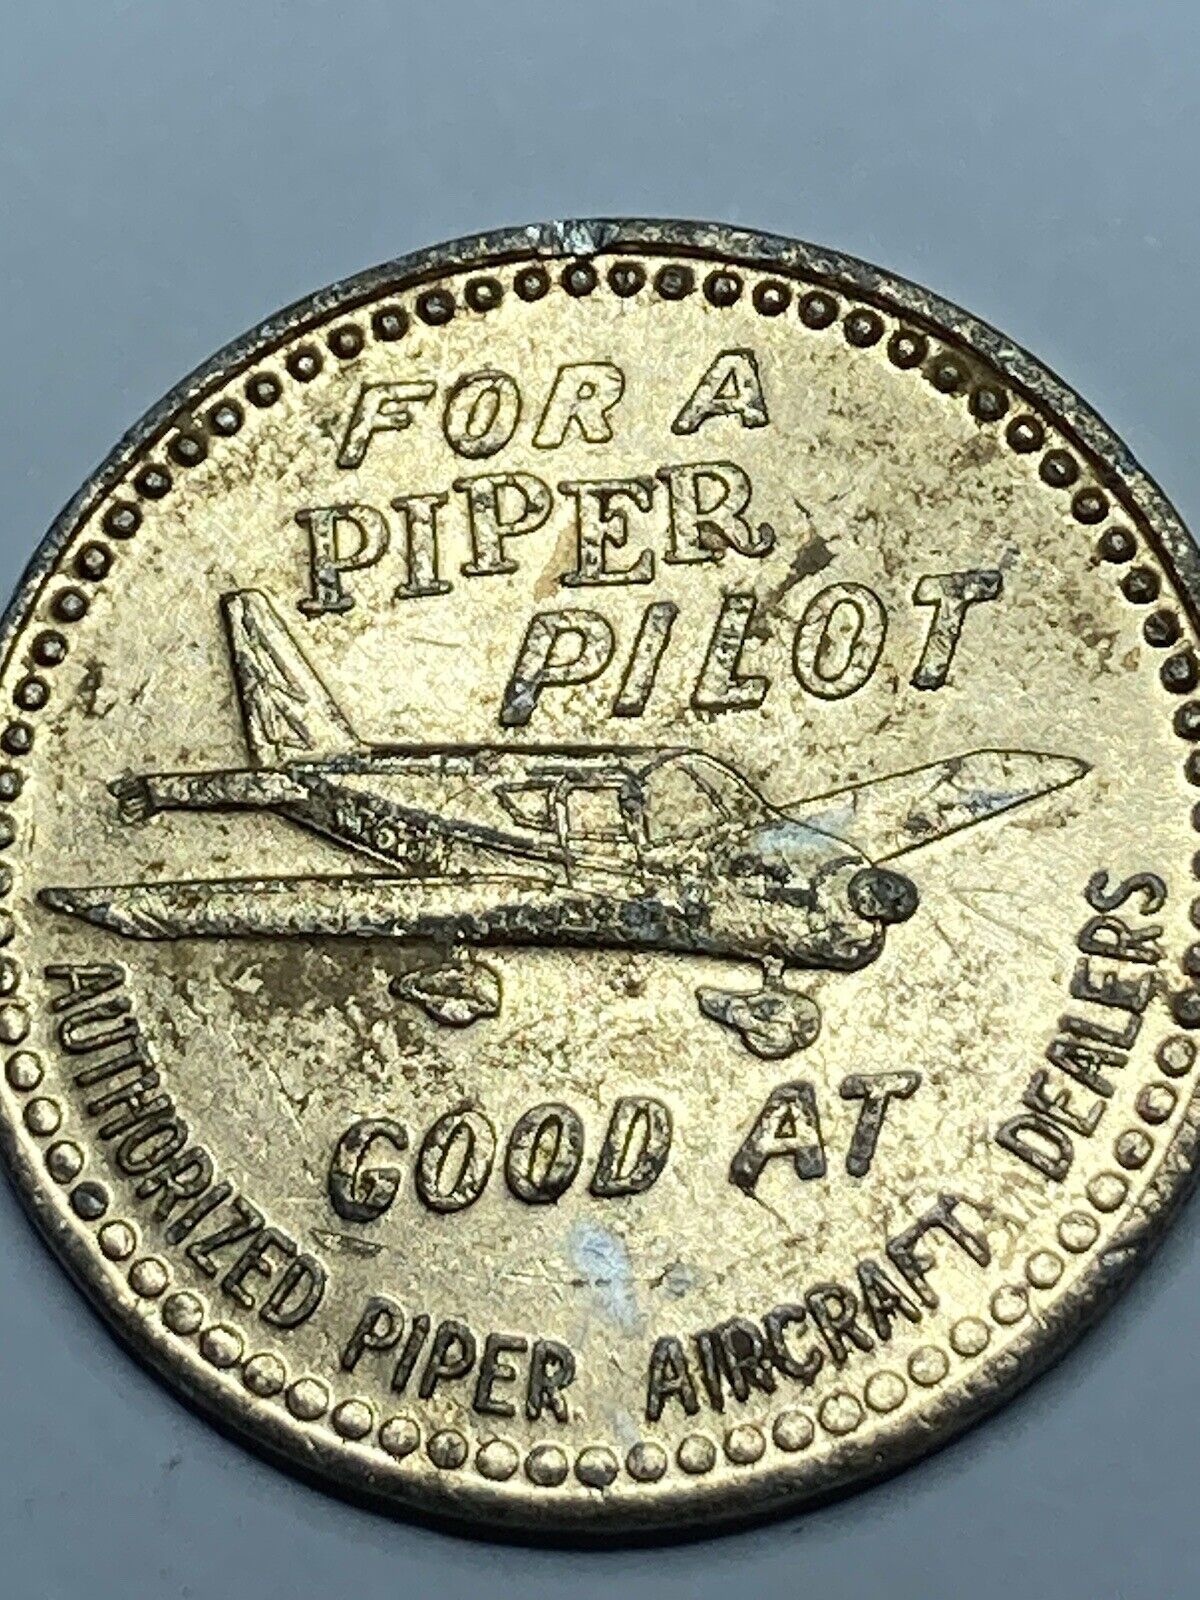 SCARCE PIPER AIRCRAFT $5 TOKEN FLYING LESSONS #qm1